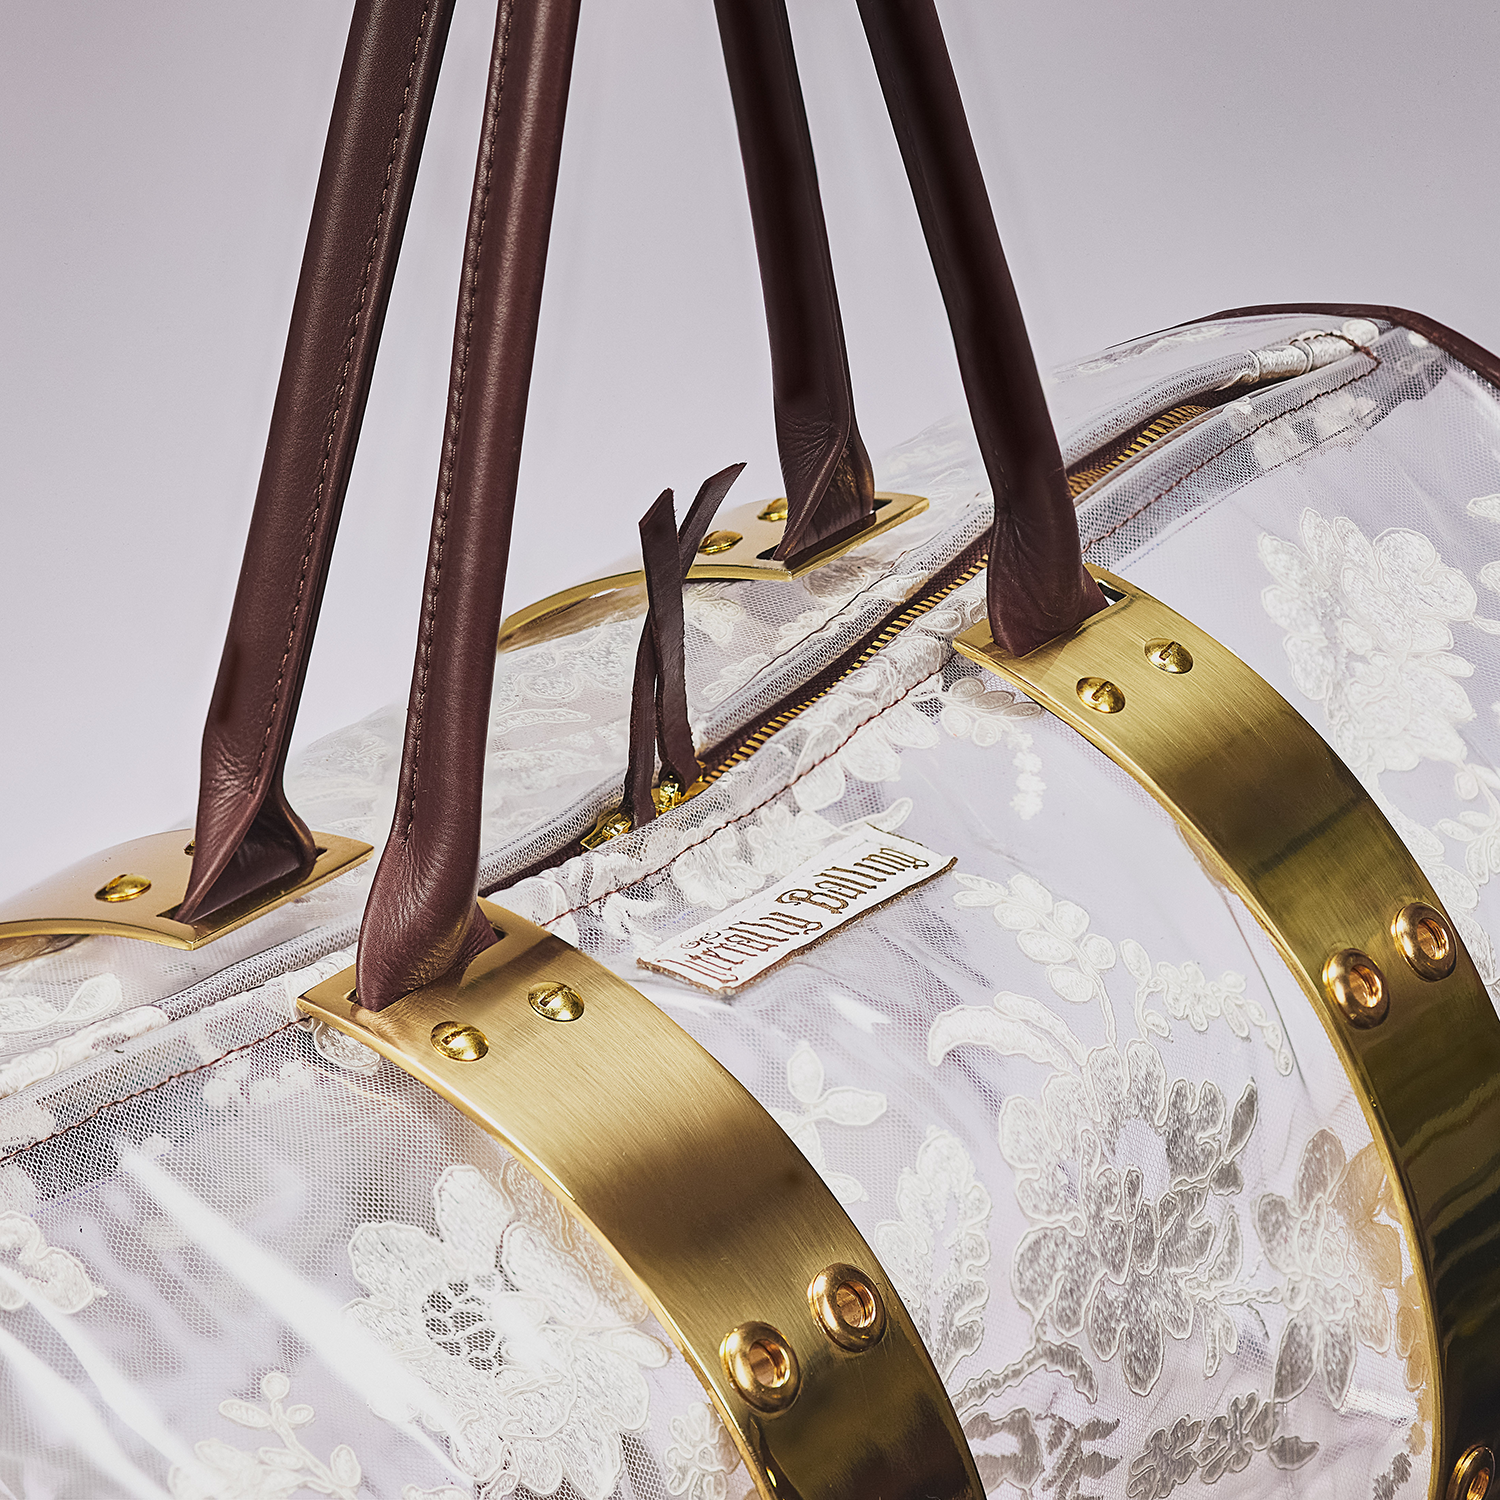 The Crystal Duffle